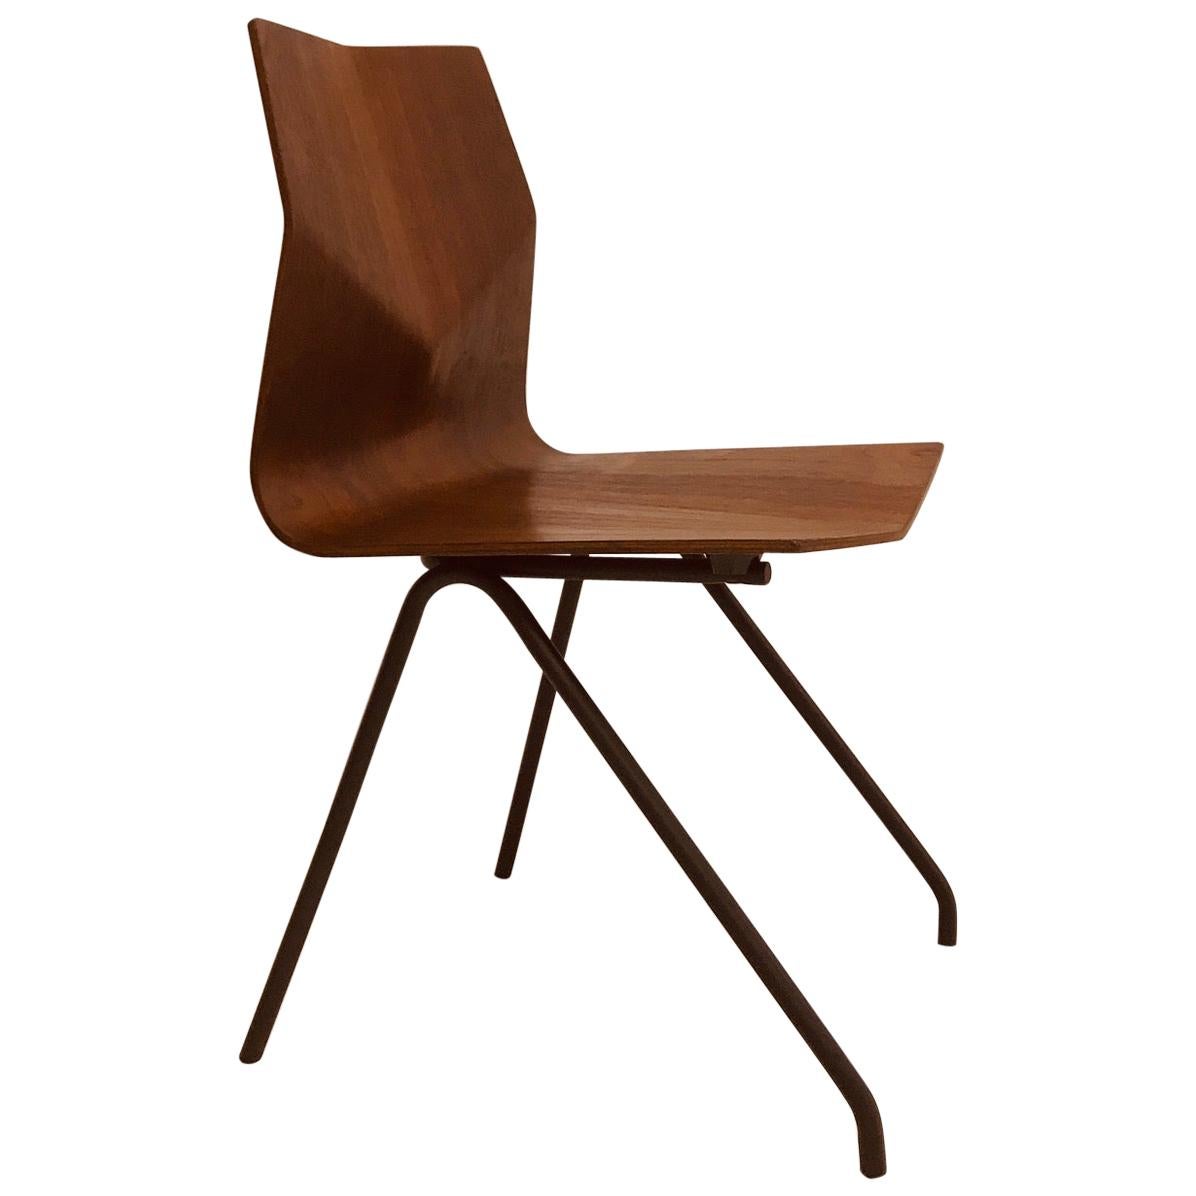 Daimond Chair by René-Jean Caillette, French Design, 1958